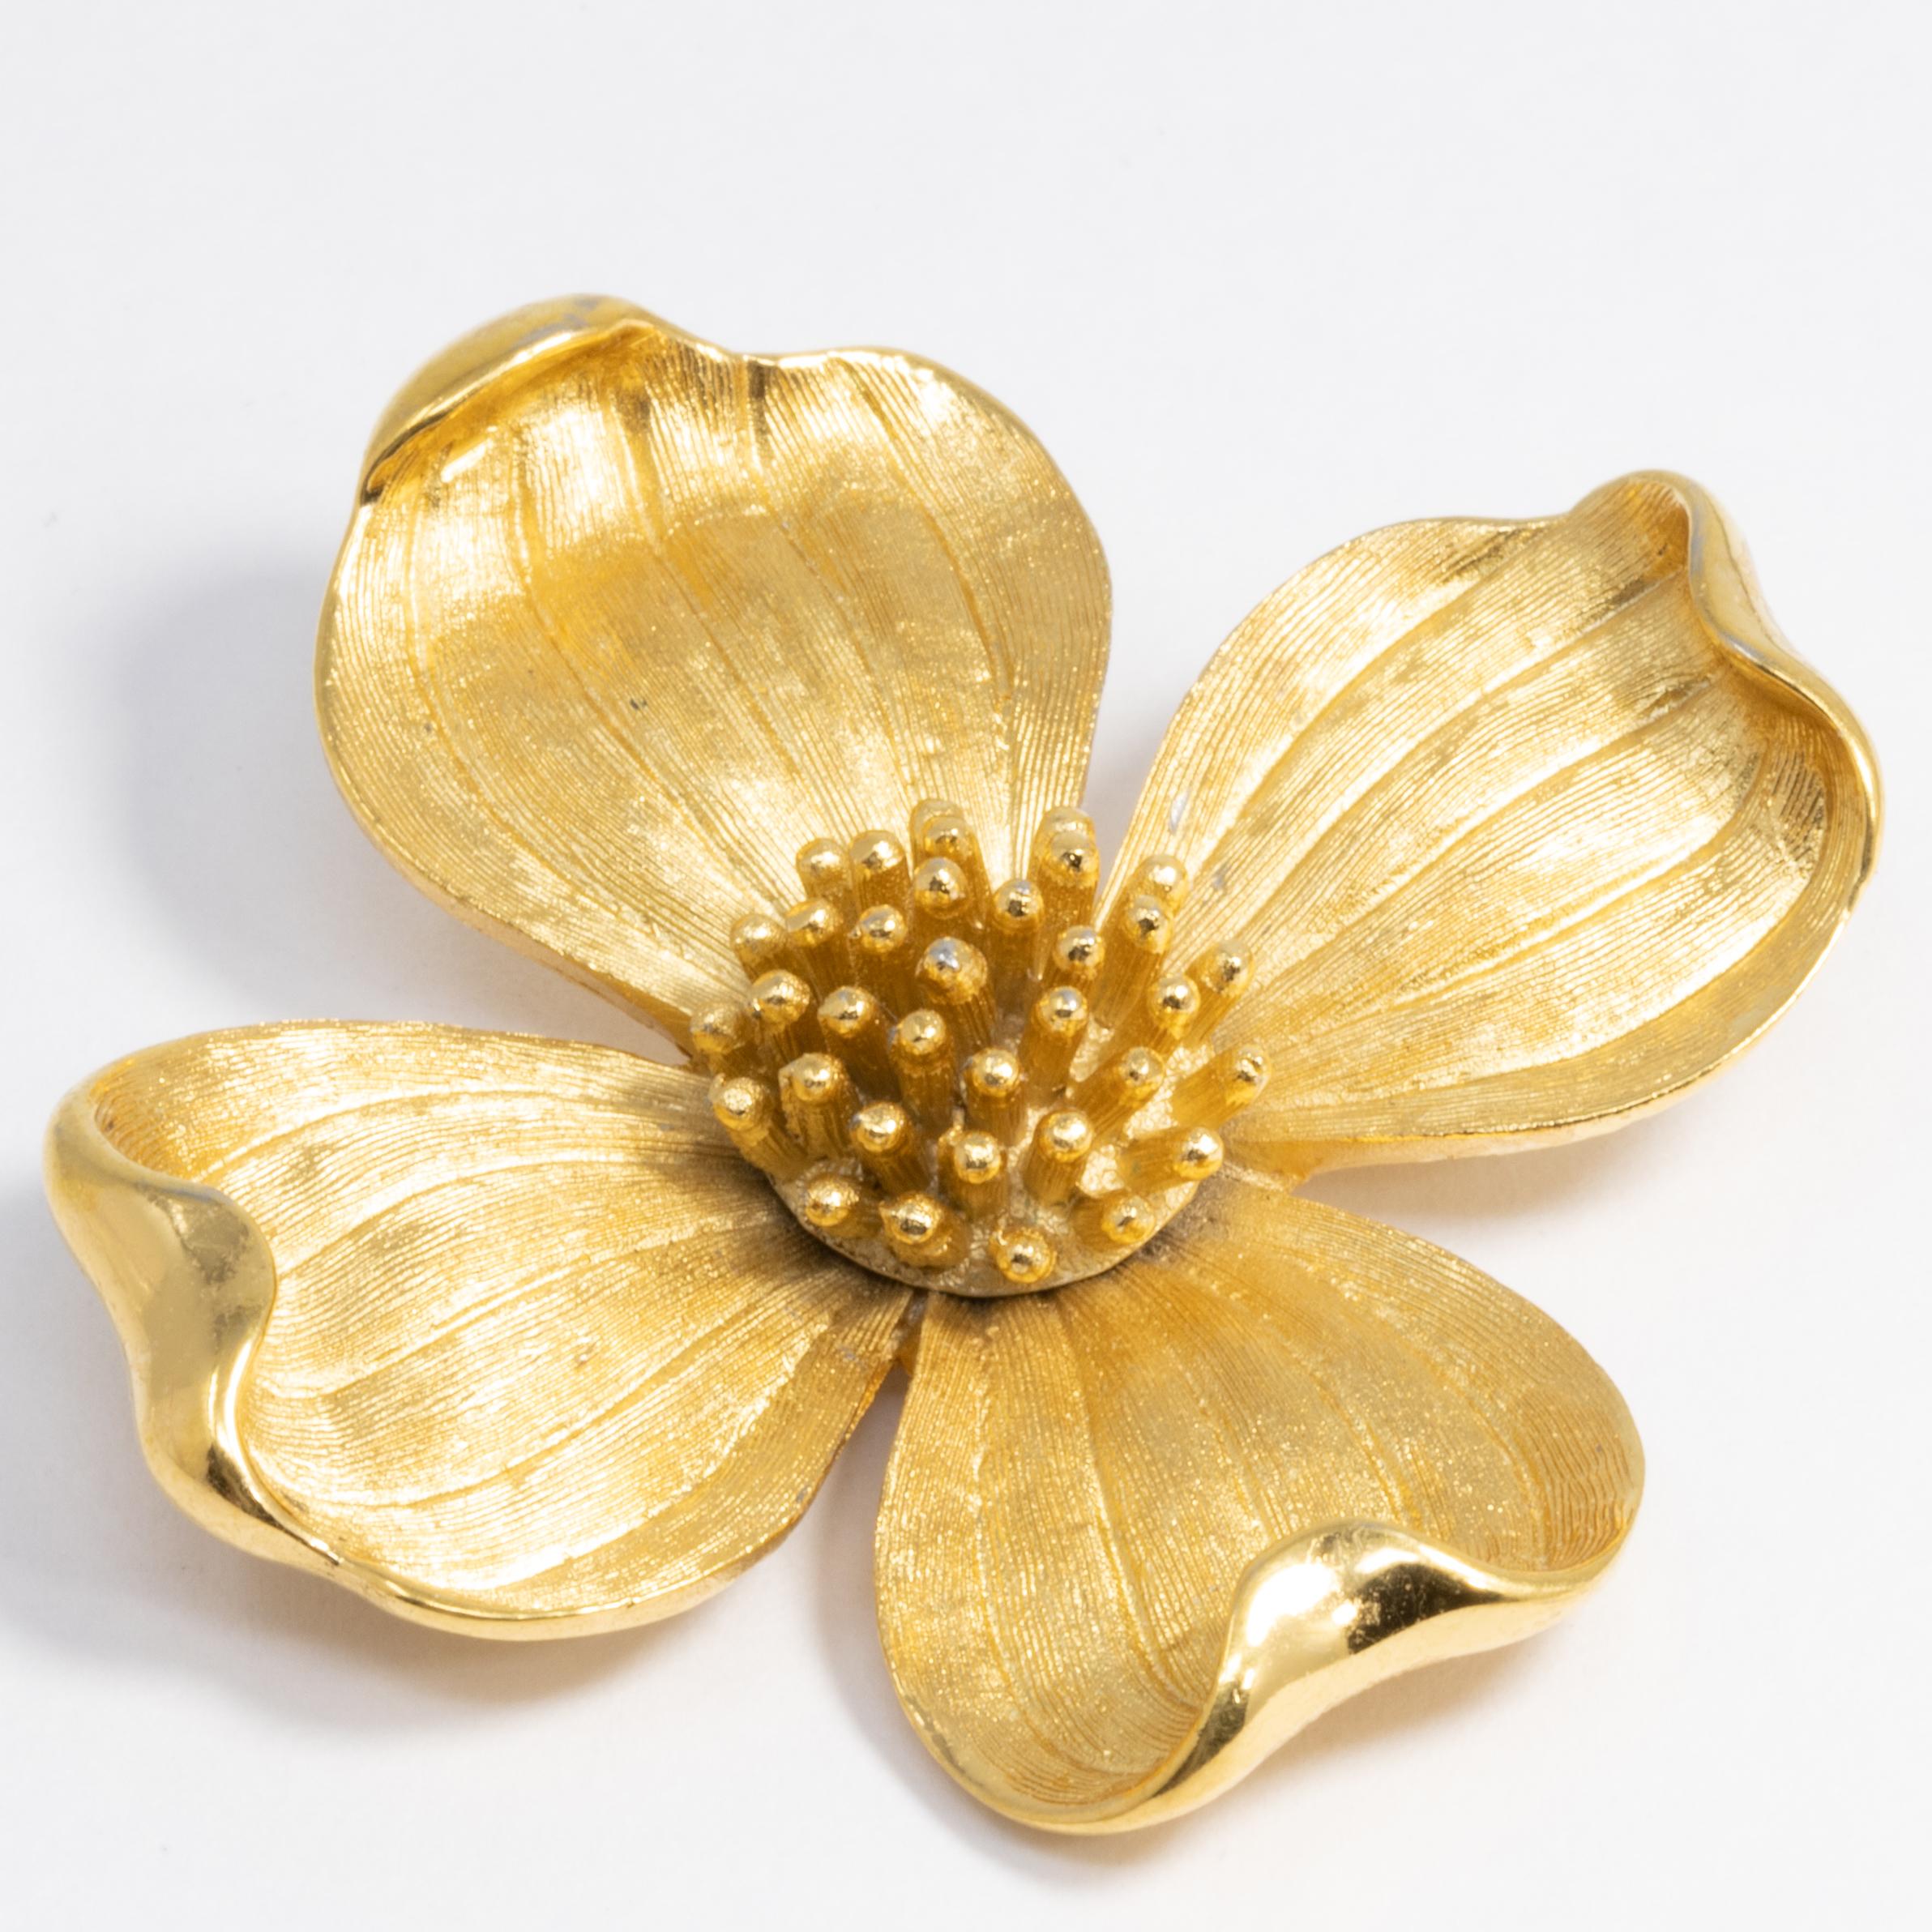 Vintage Trifari pin, featuring a beautiful blooming golden flower.

Gold-filled.

Marks / hallmarks: Trifari ©

If you are interested, please don't hesitate to reach out with questions or make an offer!